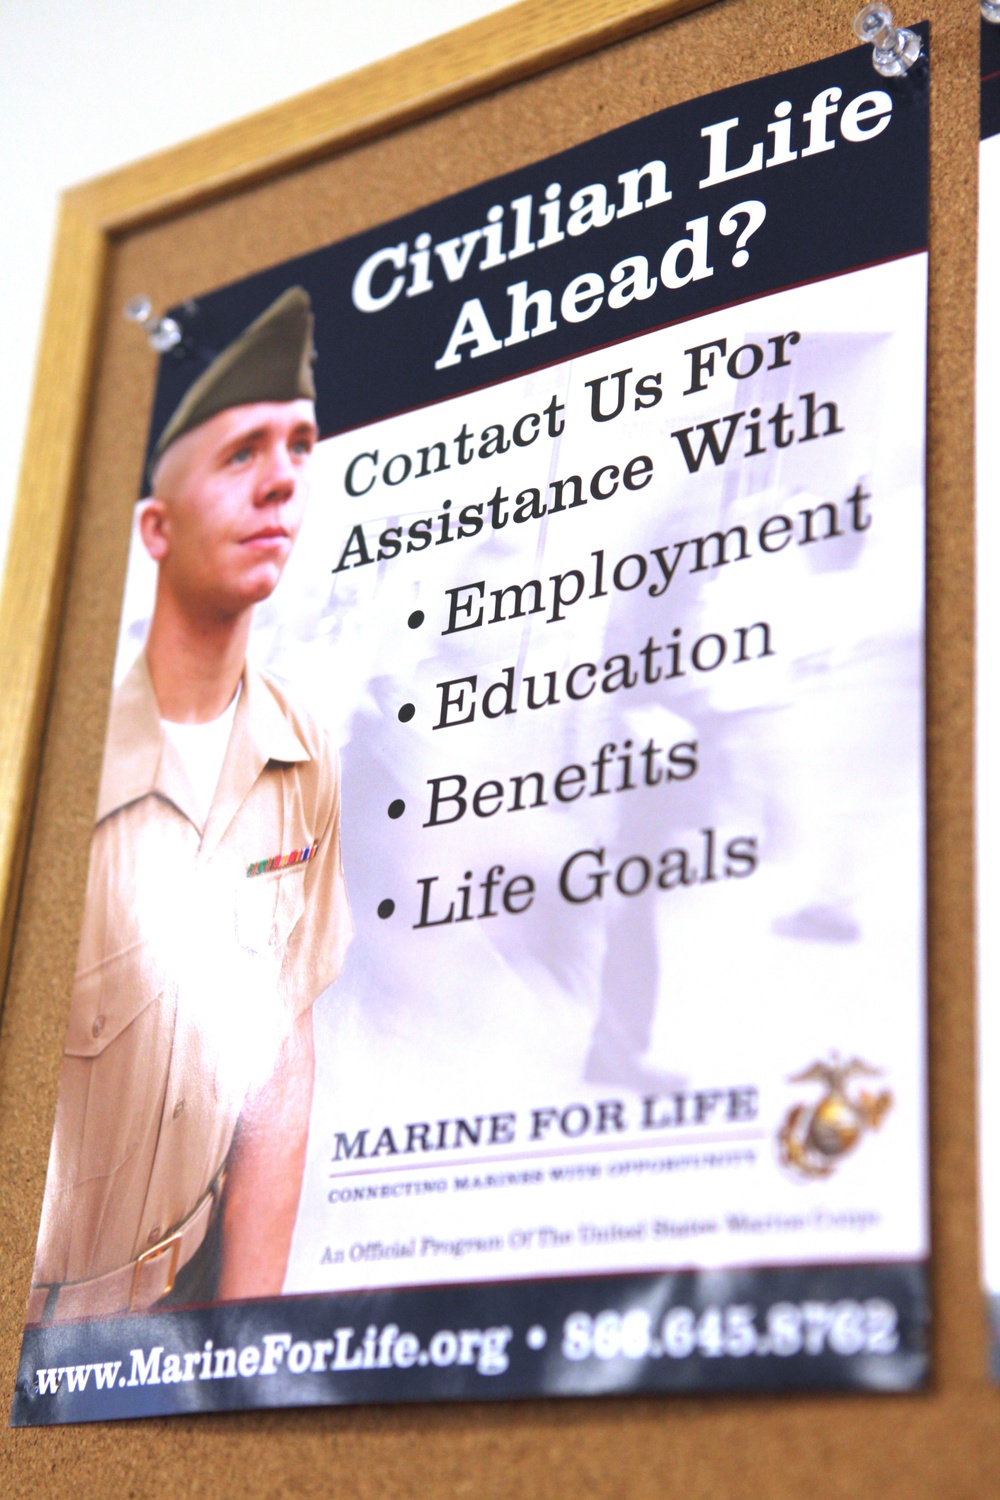 Marines prepare for next ‘mission’ in life